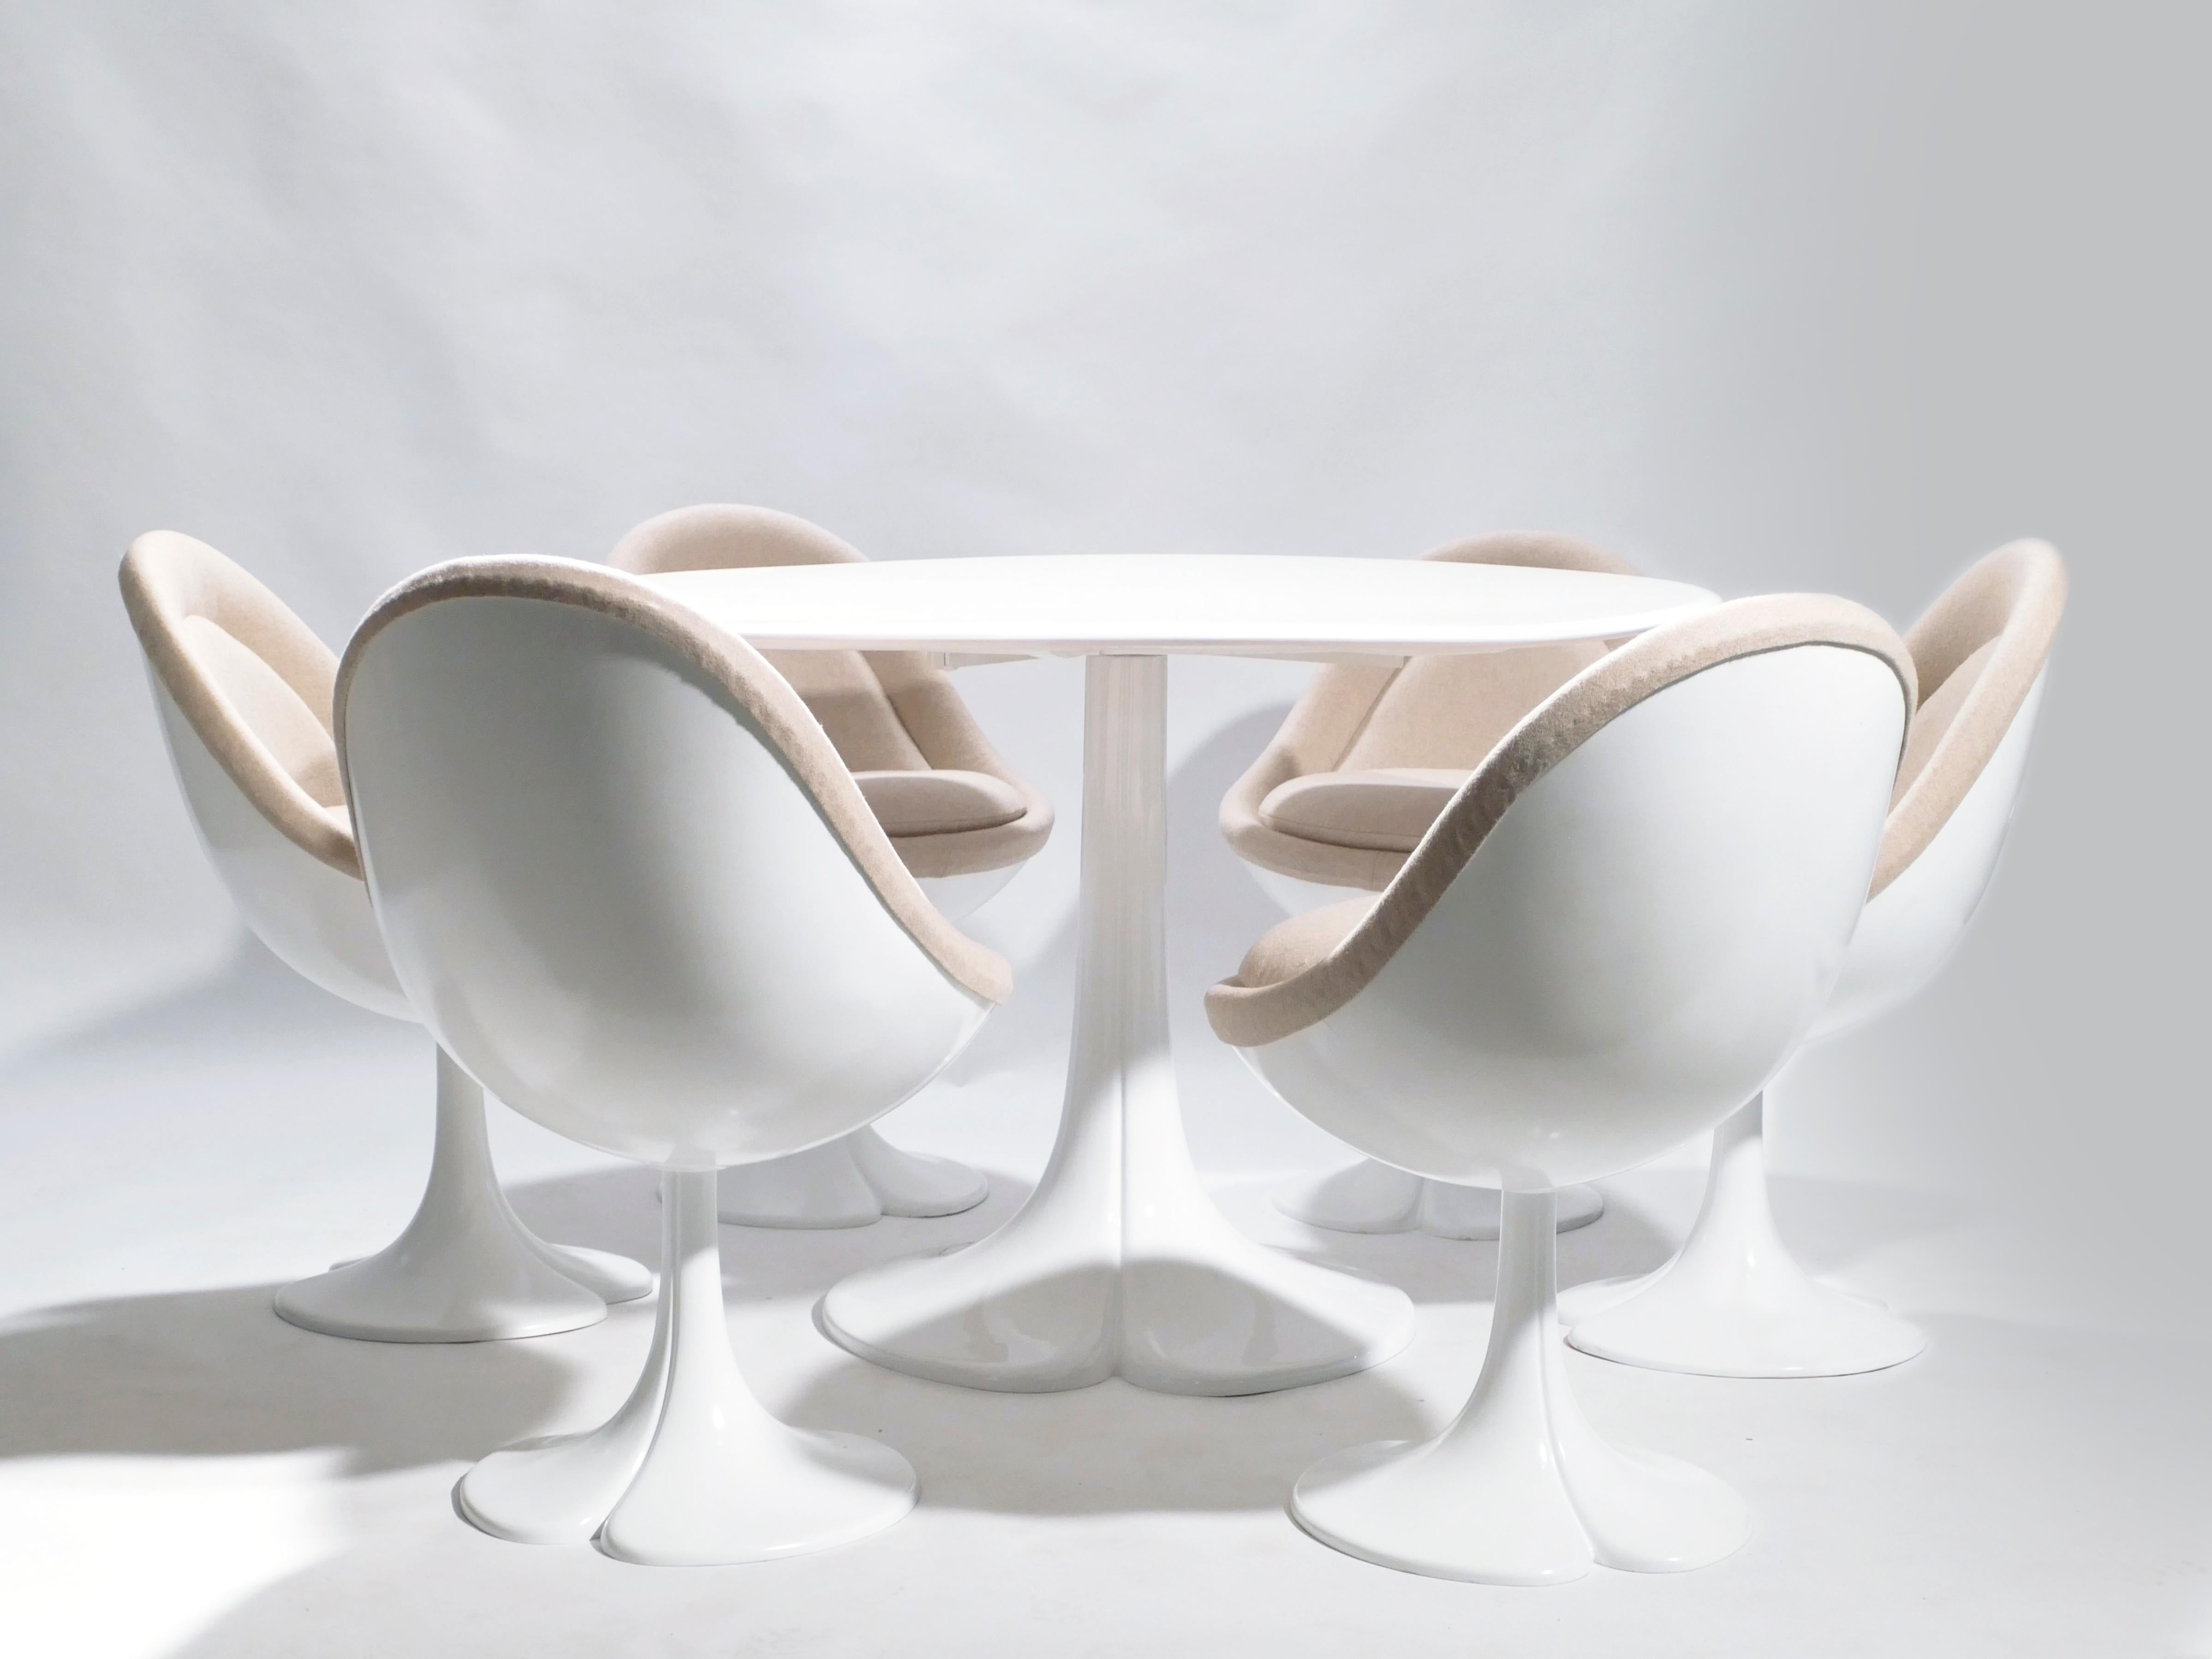 French designer Pierre Paulin was most known for his chairs, which featured comfortable, body-conforming curves and soft materials, as seen here. This set of a dining table and six chairs is emblematic of Paulin’s work for Dutch furniture company